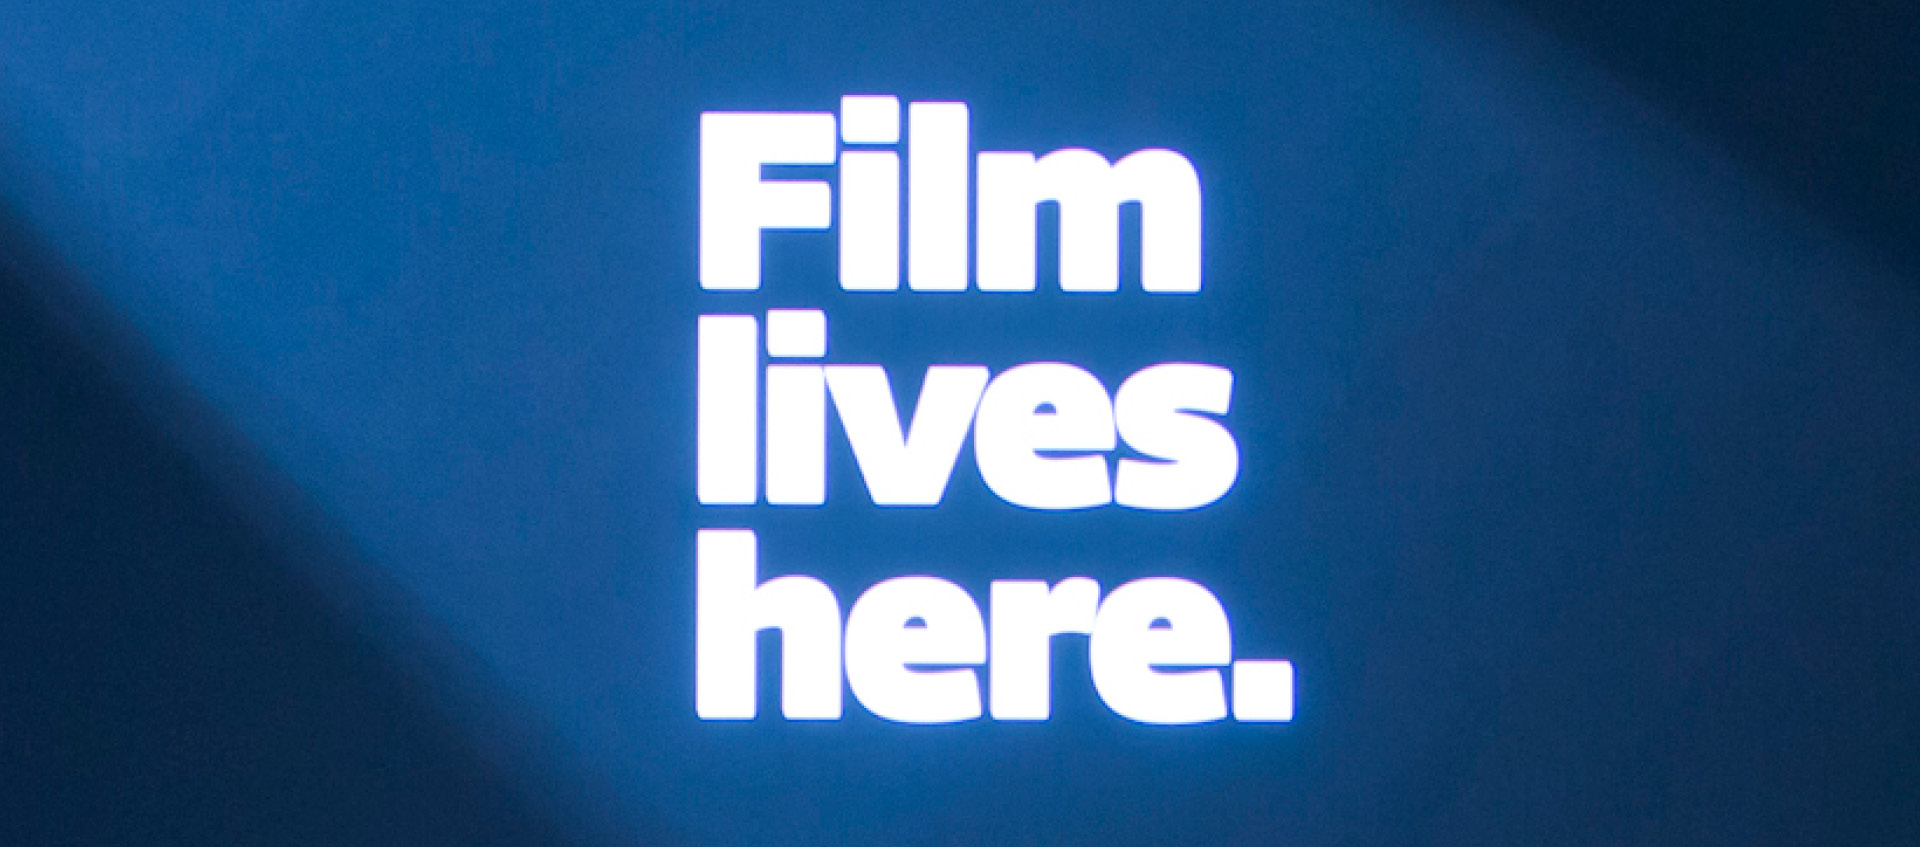 a spotlight on the words film lives here